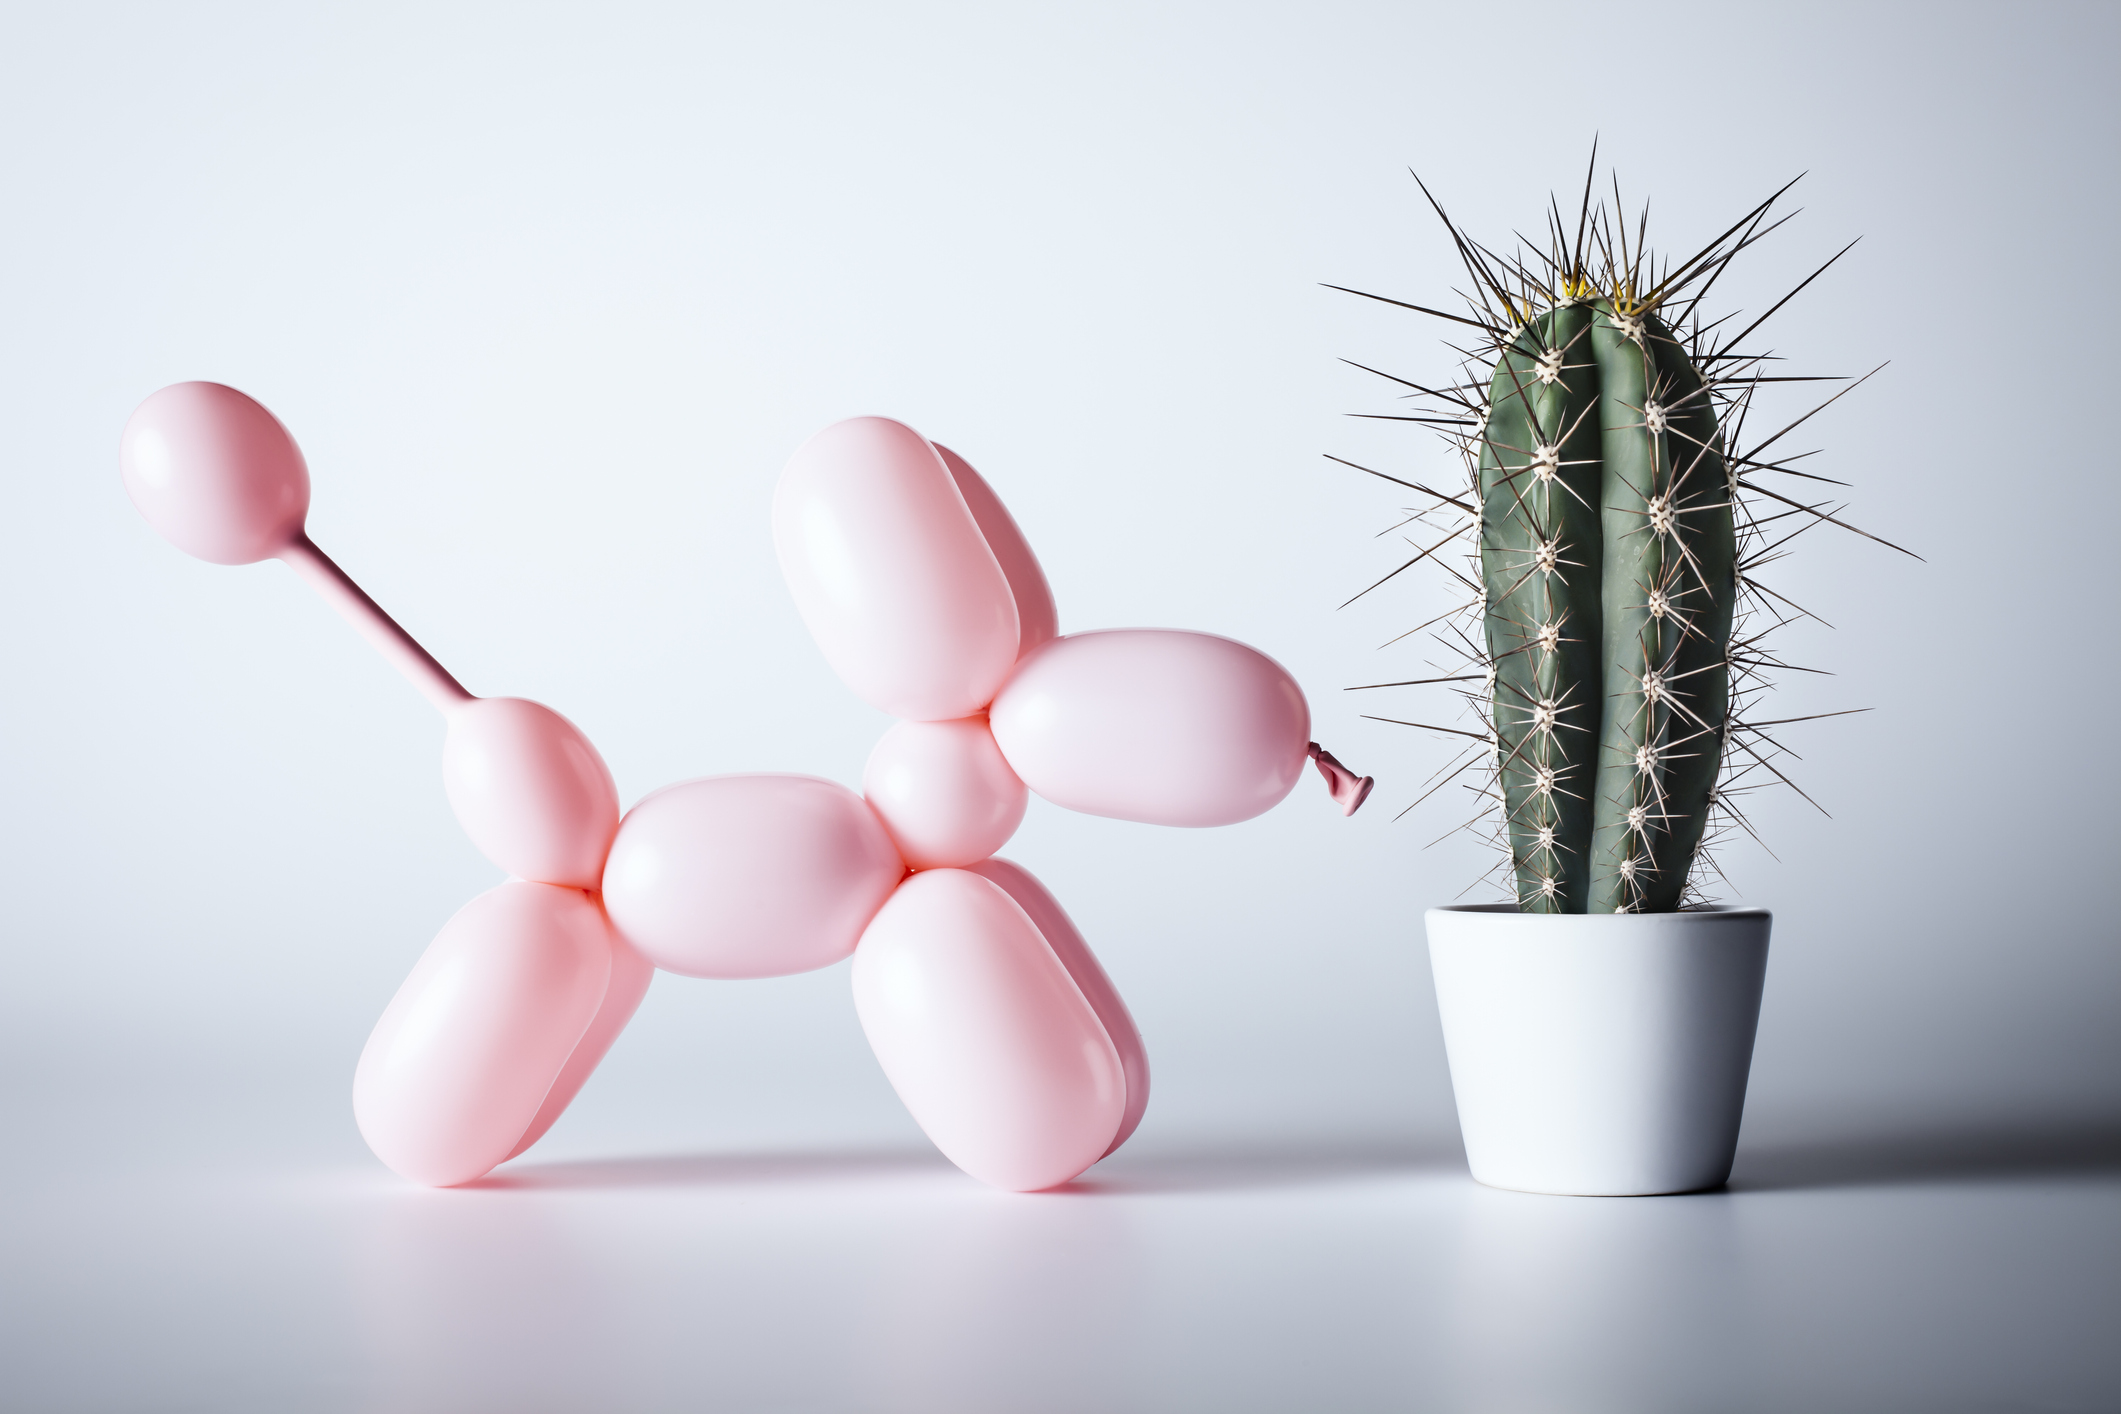 poodle made of a balloon and a cactus plant; preparing business plan for HMRC